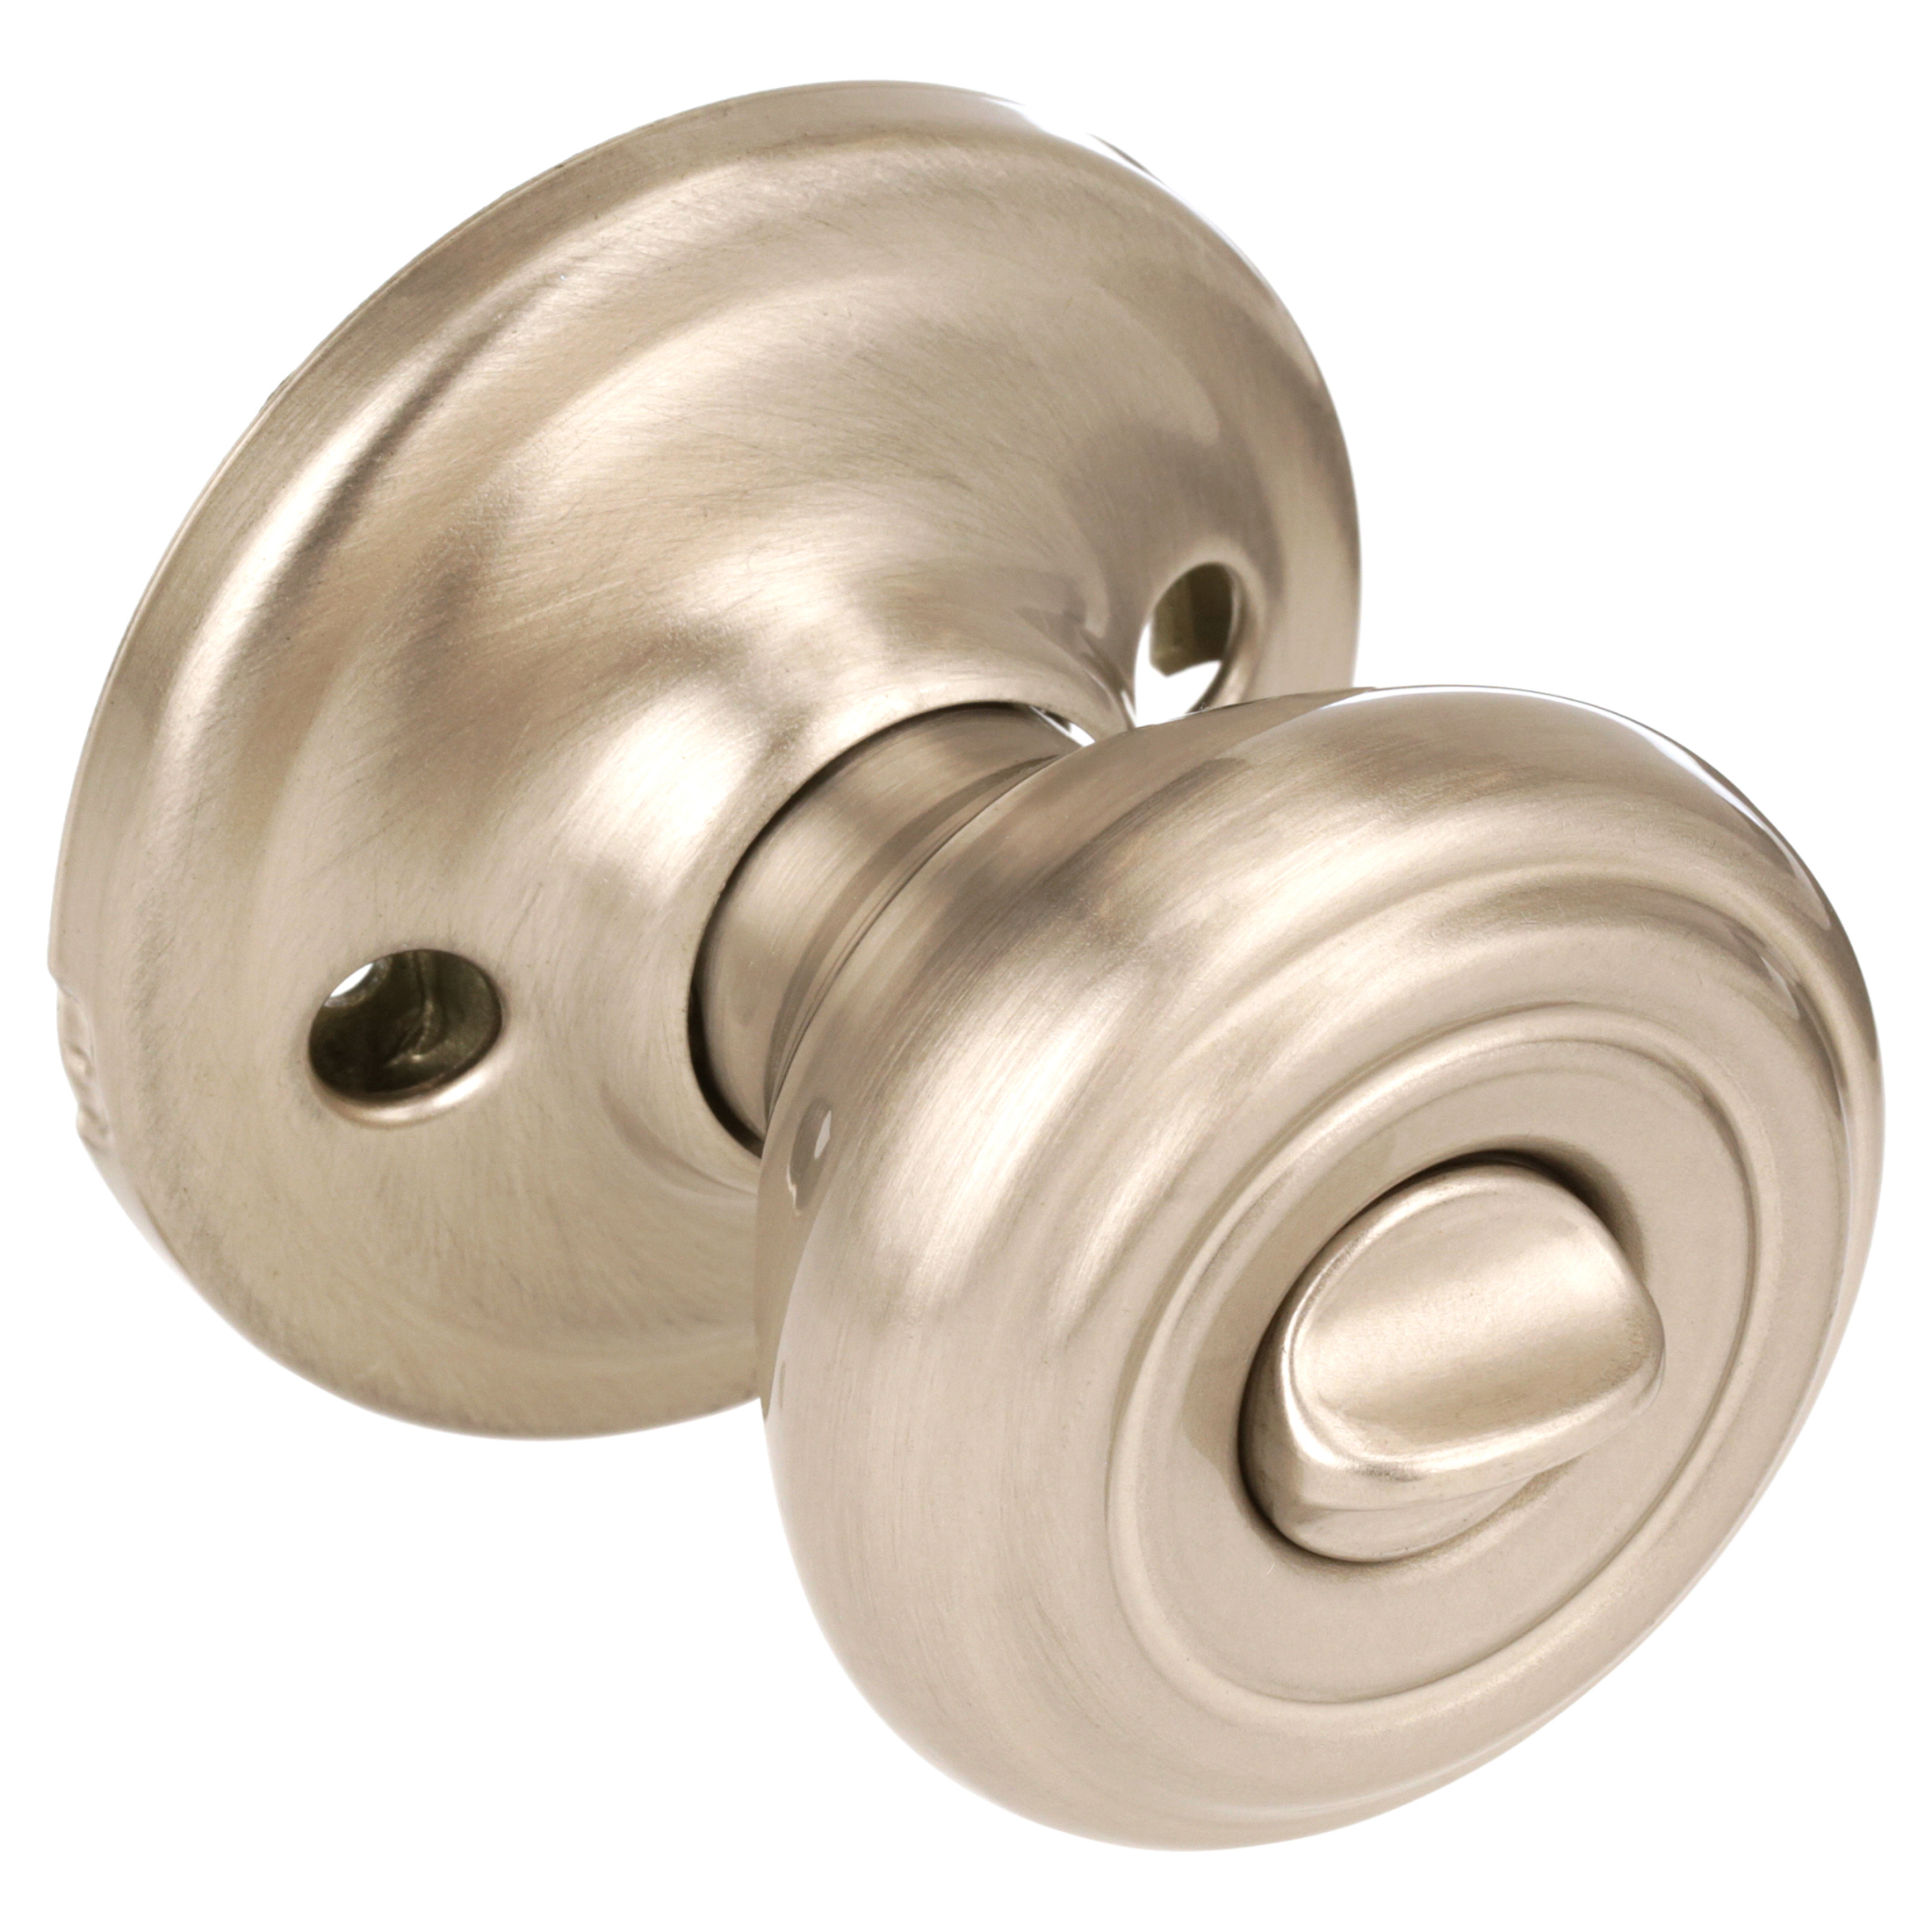 Kwikset Cameron Keyed Entry Knob Featuring Smartkey Security™ in SC 